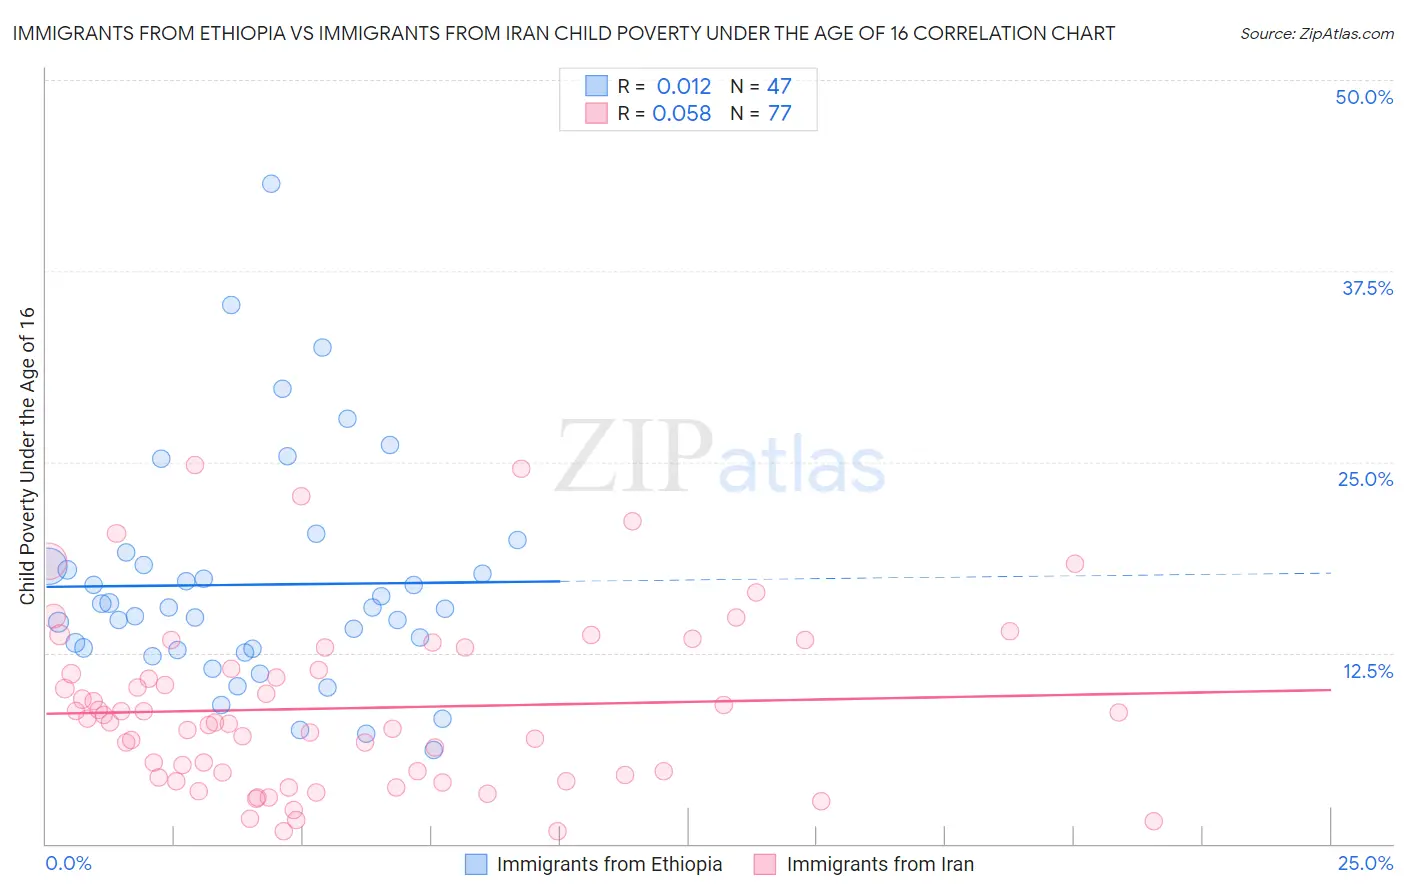 Immigrants from Ethiopia vs Immigrants from Iran Child Poverty Under the Age of 16